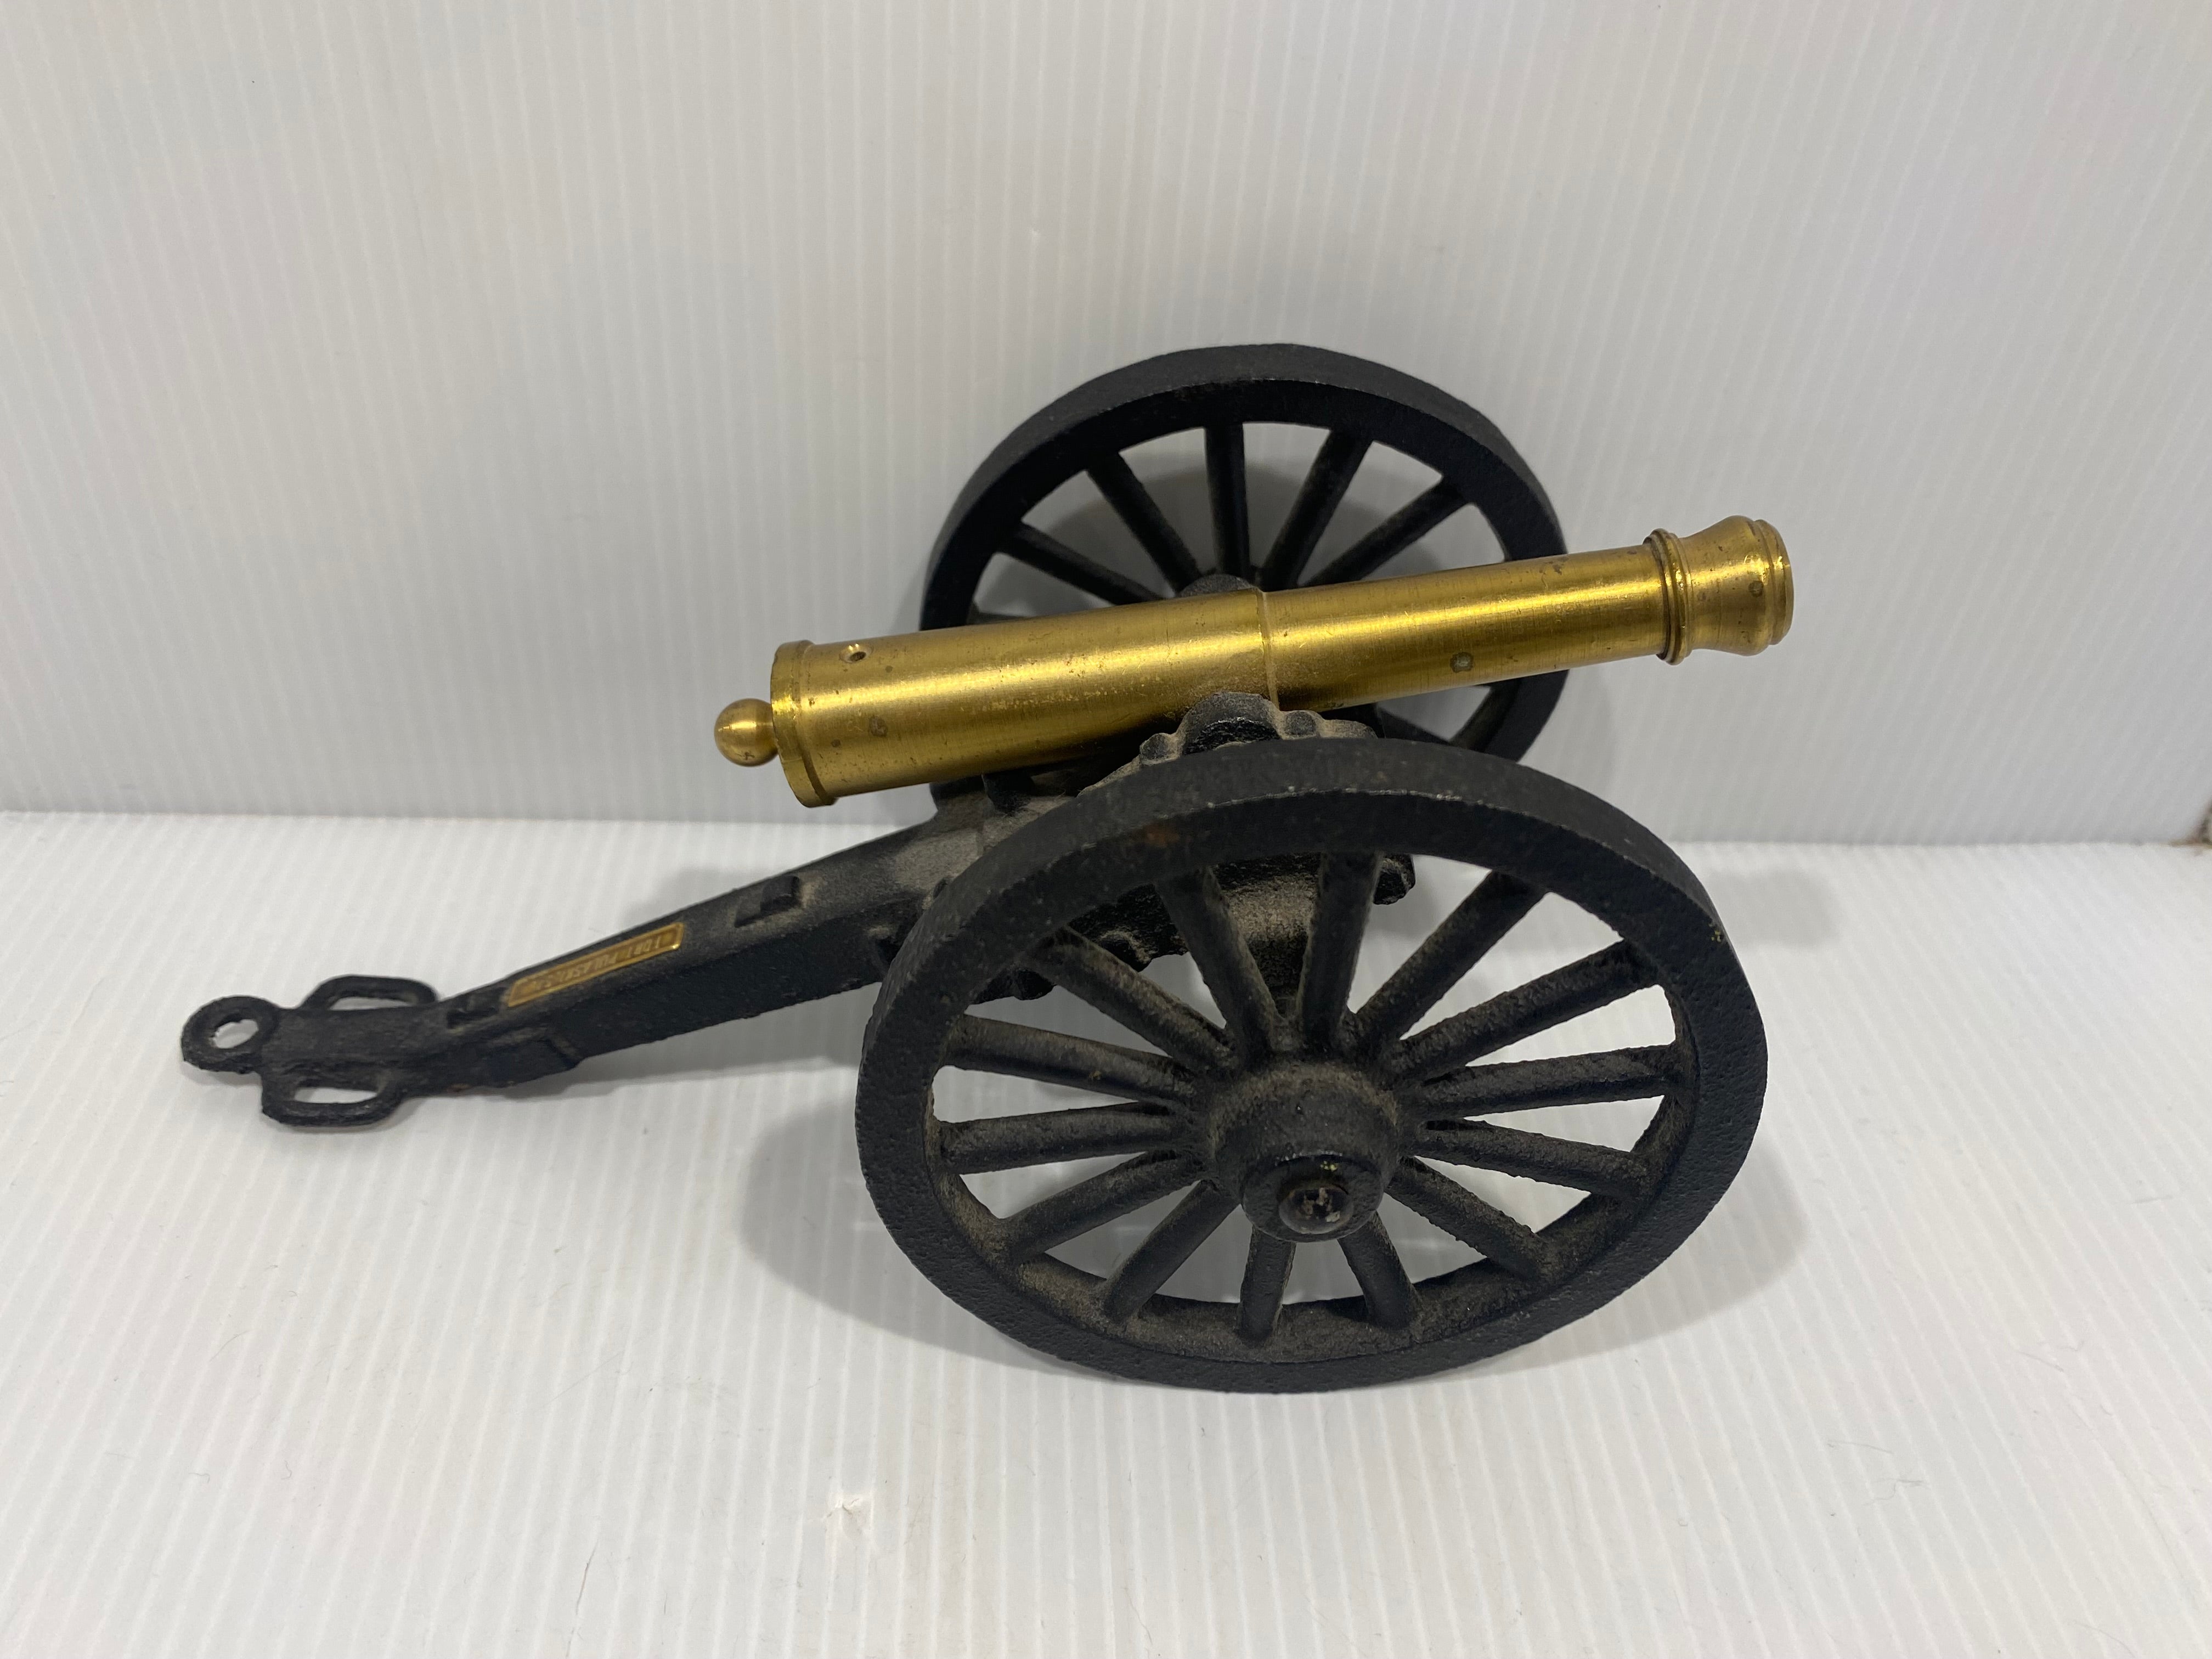 Vintage MFCO C 1/3 Brass Cannon with Cast Iron Wheels Toy.